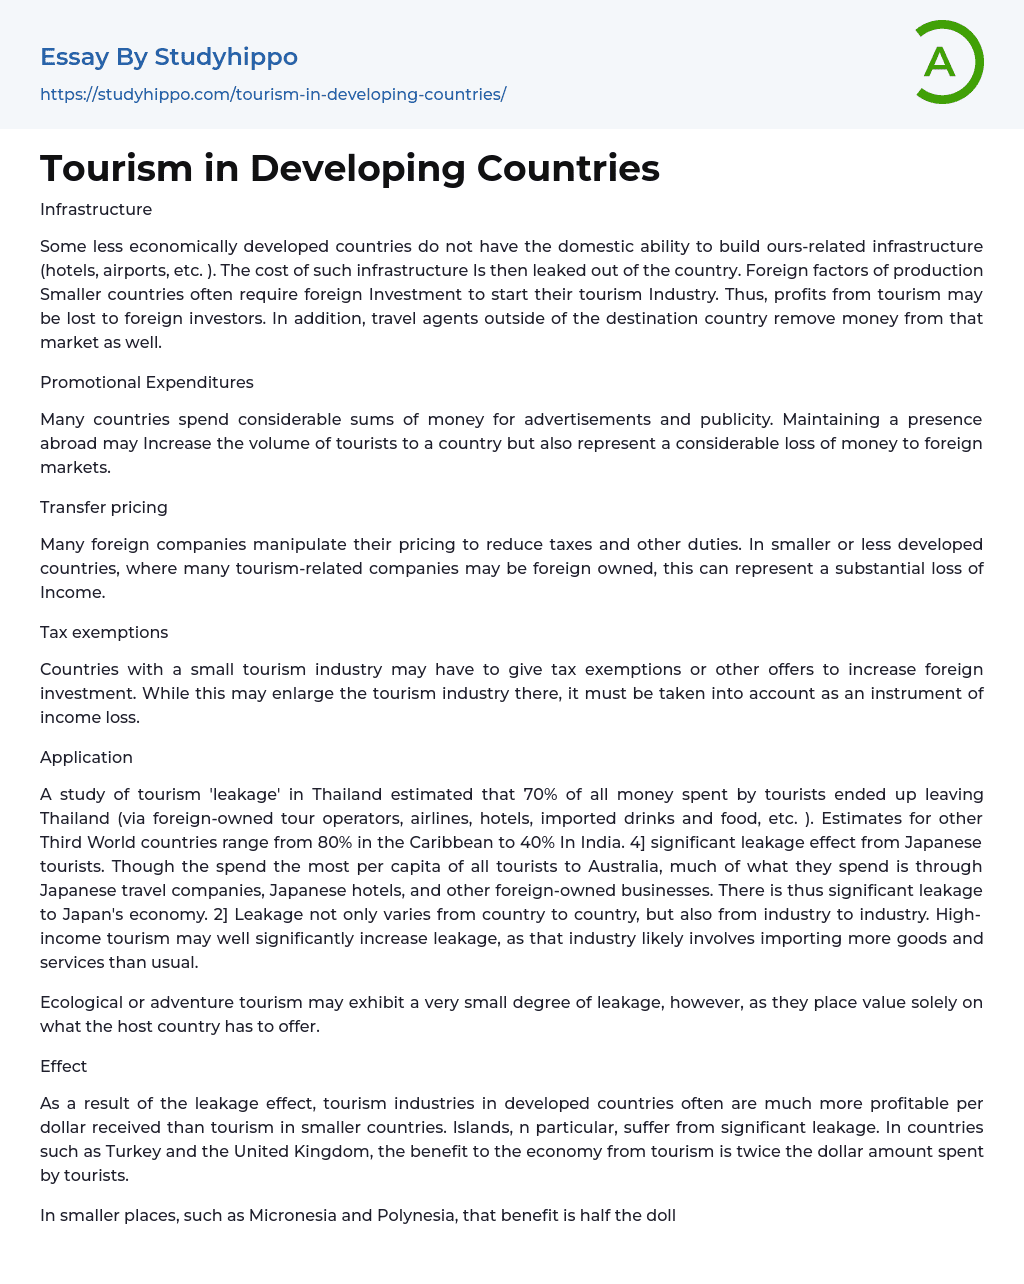 Tourism in Developing Countries Essay Example